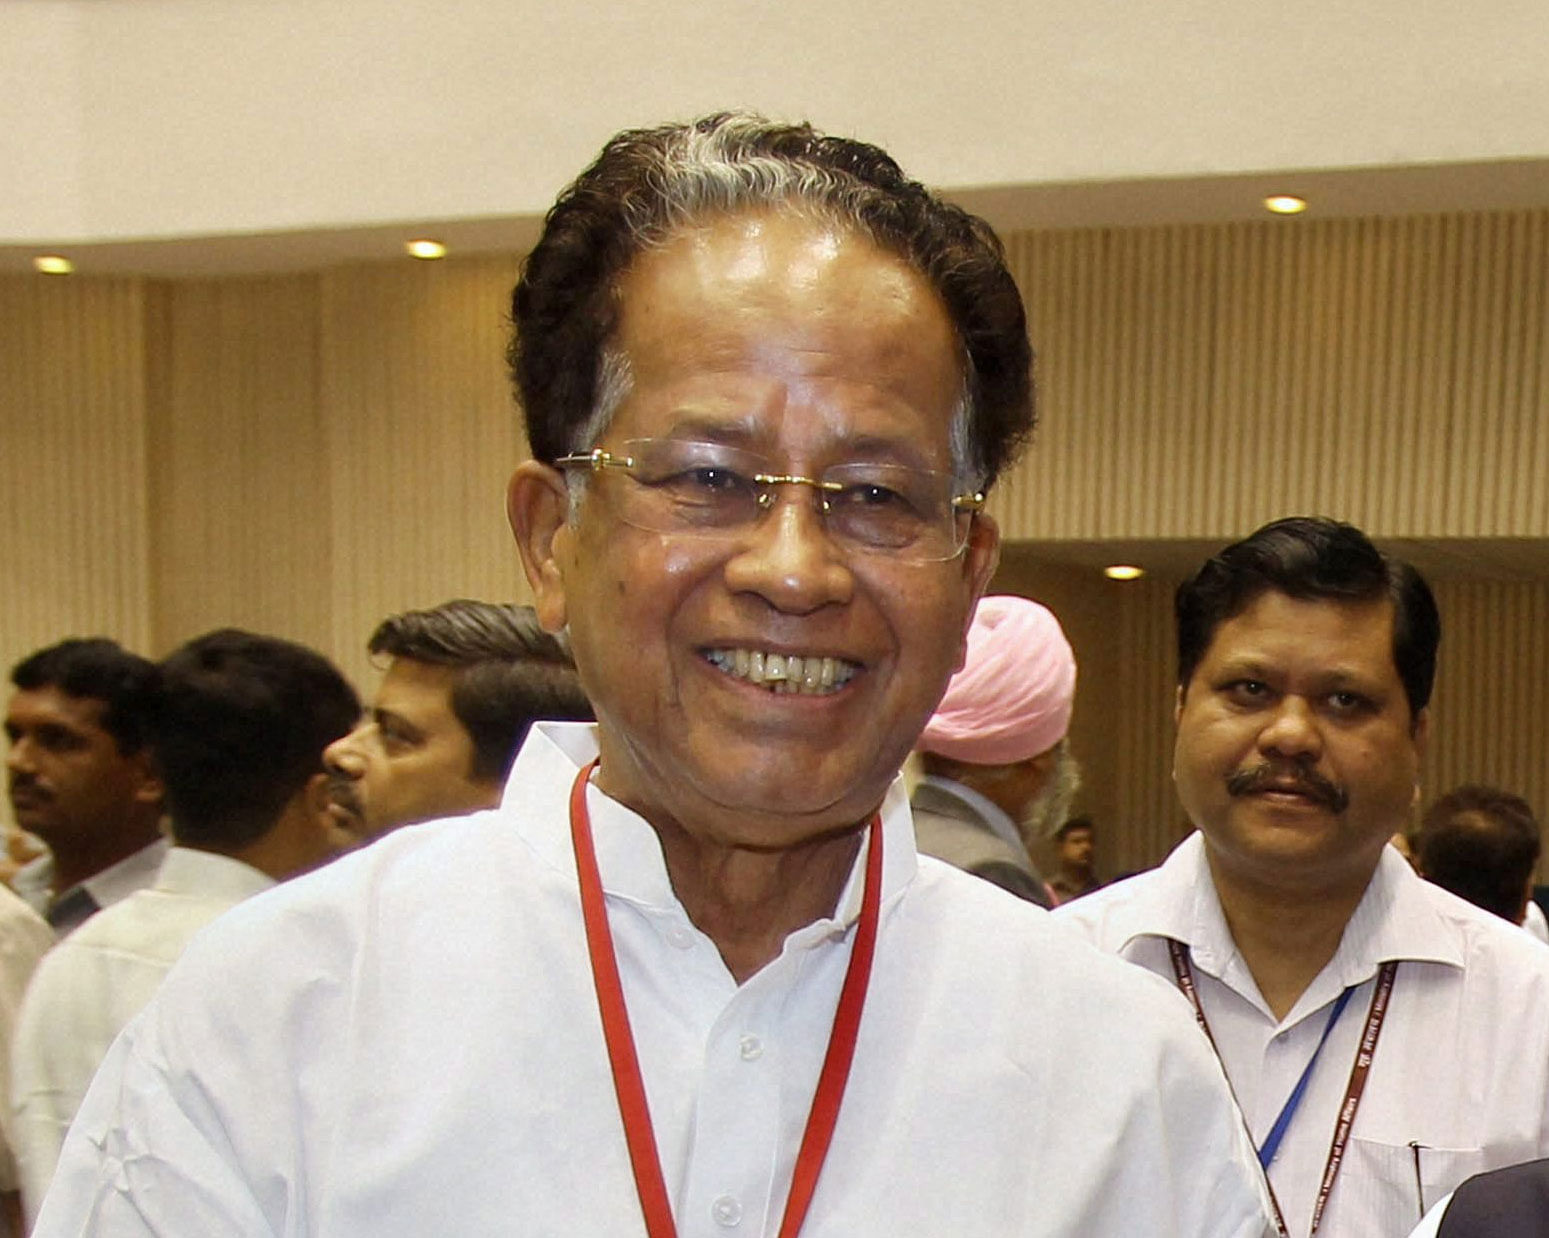 Criminal case for use of  HIV-infected blood: Gogoi